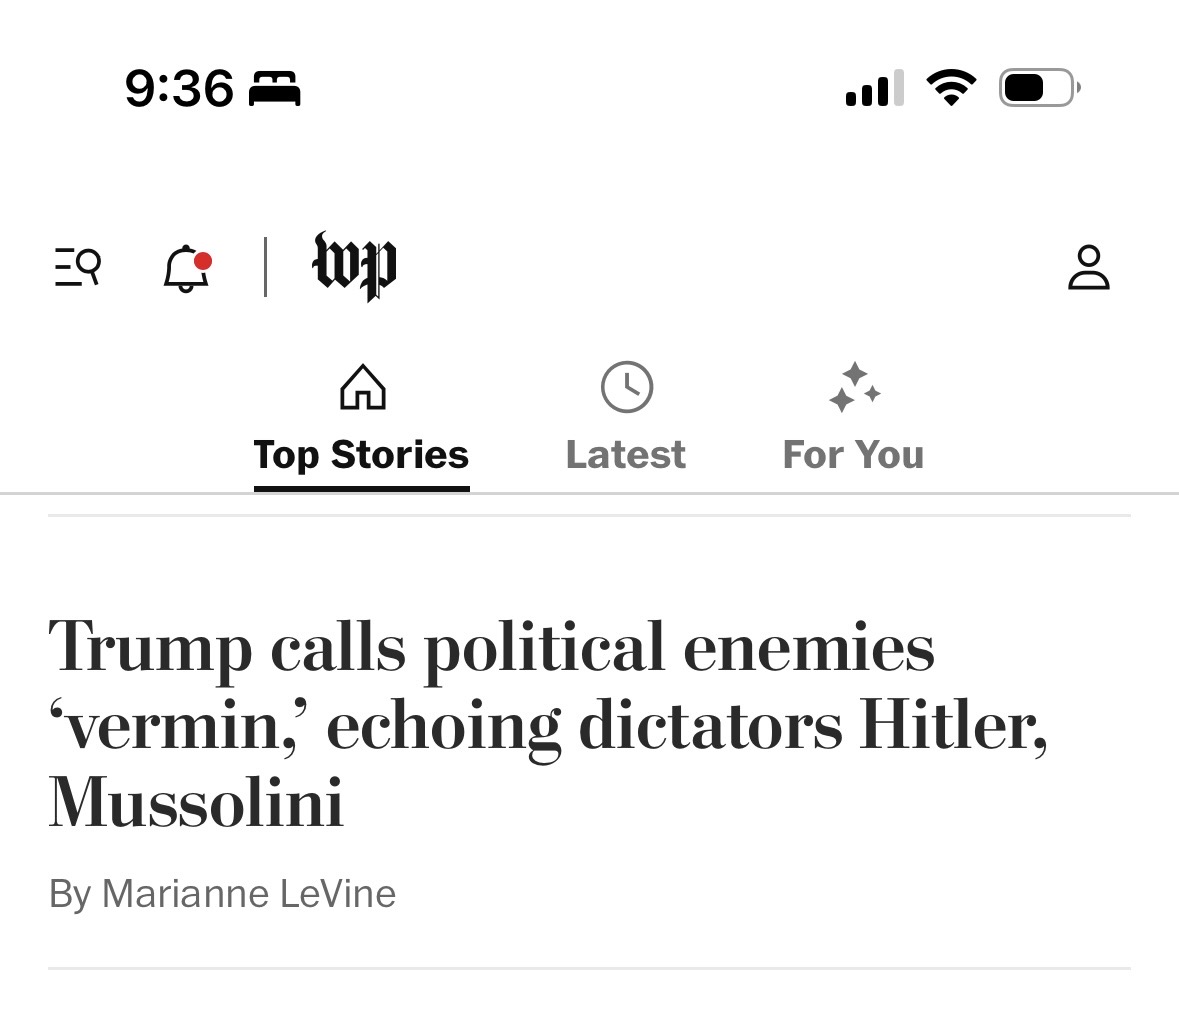 A Washington Post headline likening Trump's use of the word "vermin" to that of Hitler and Mussolini